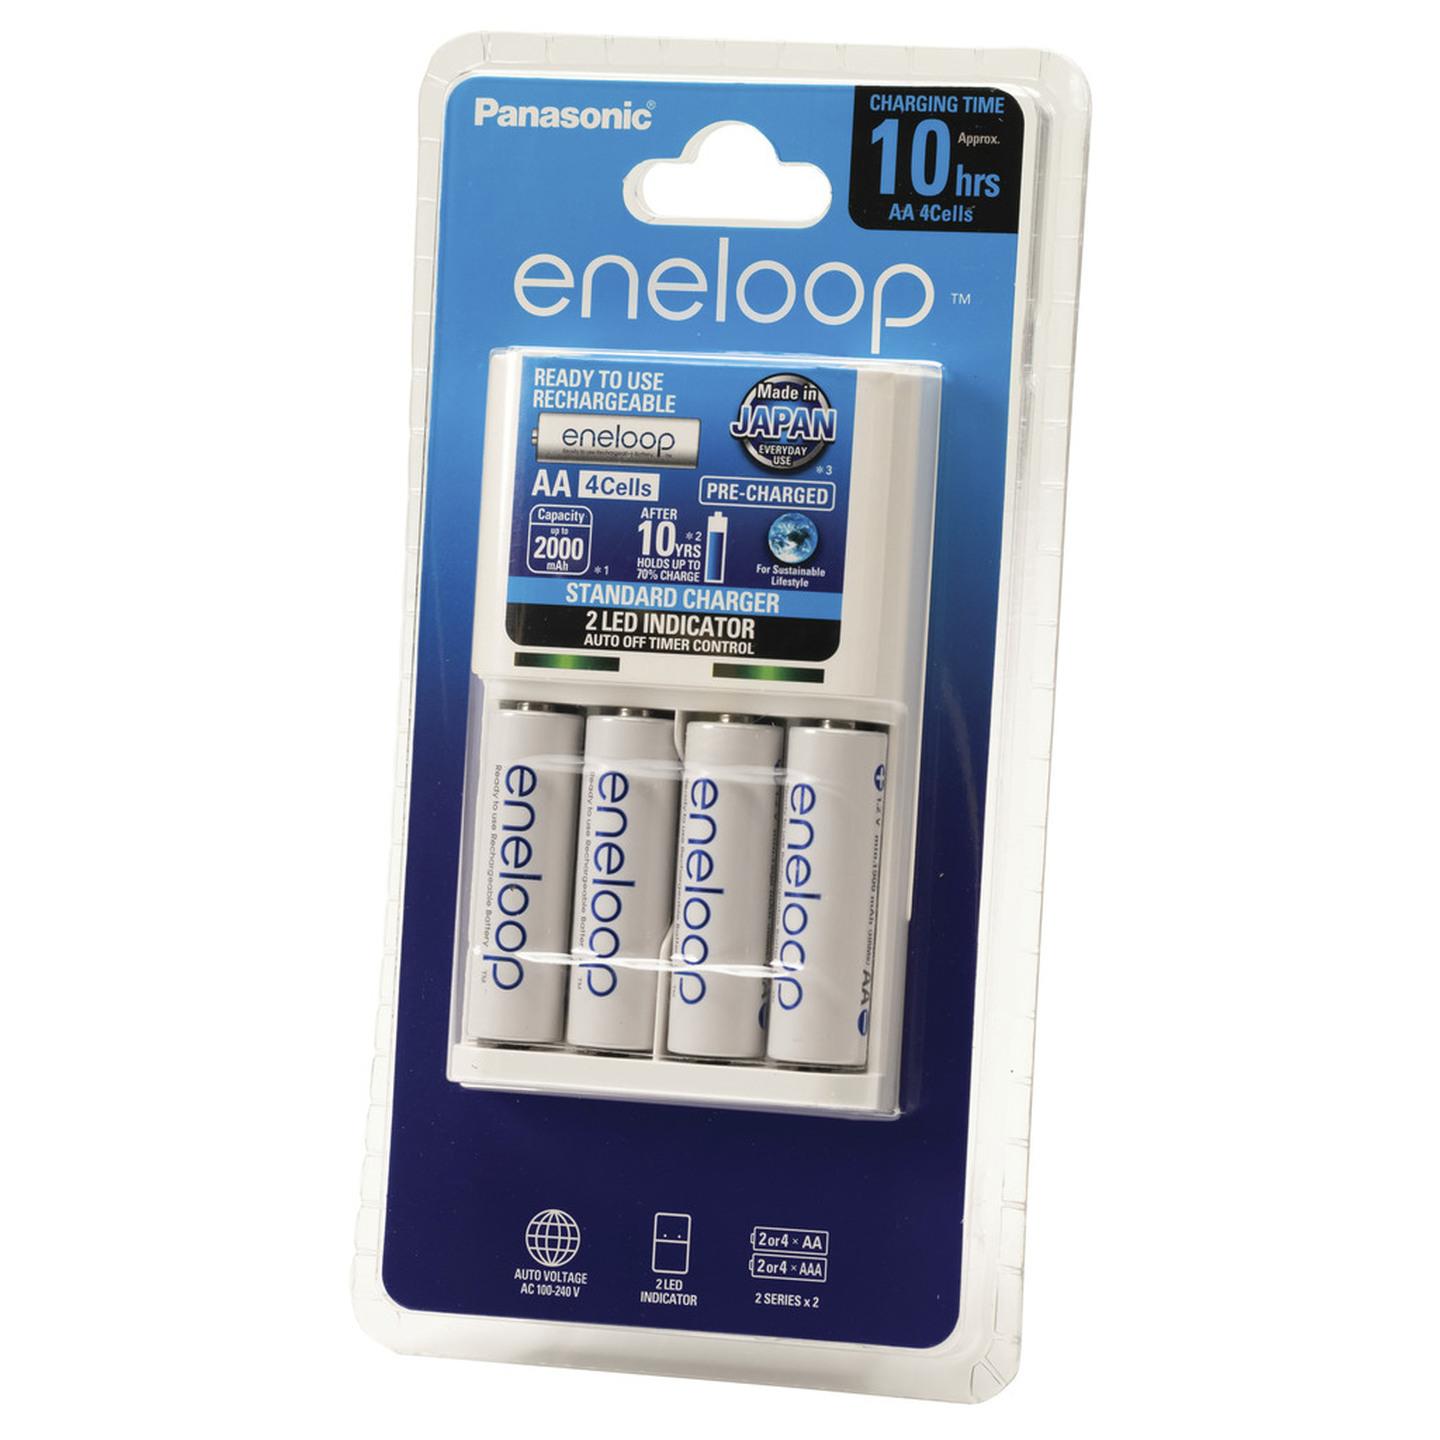 Panasonic Ni-MH Battery Charger with 4 Eneloop Batteries